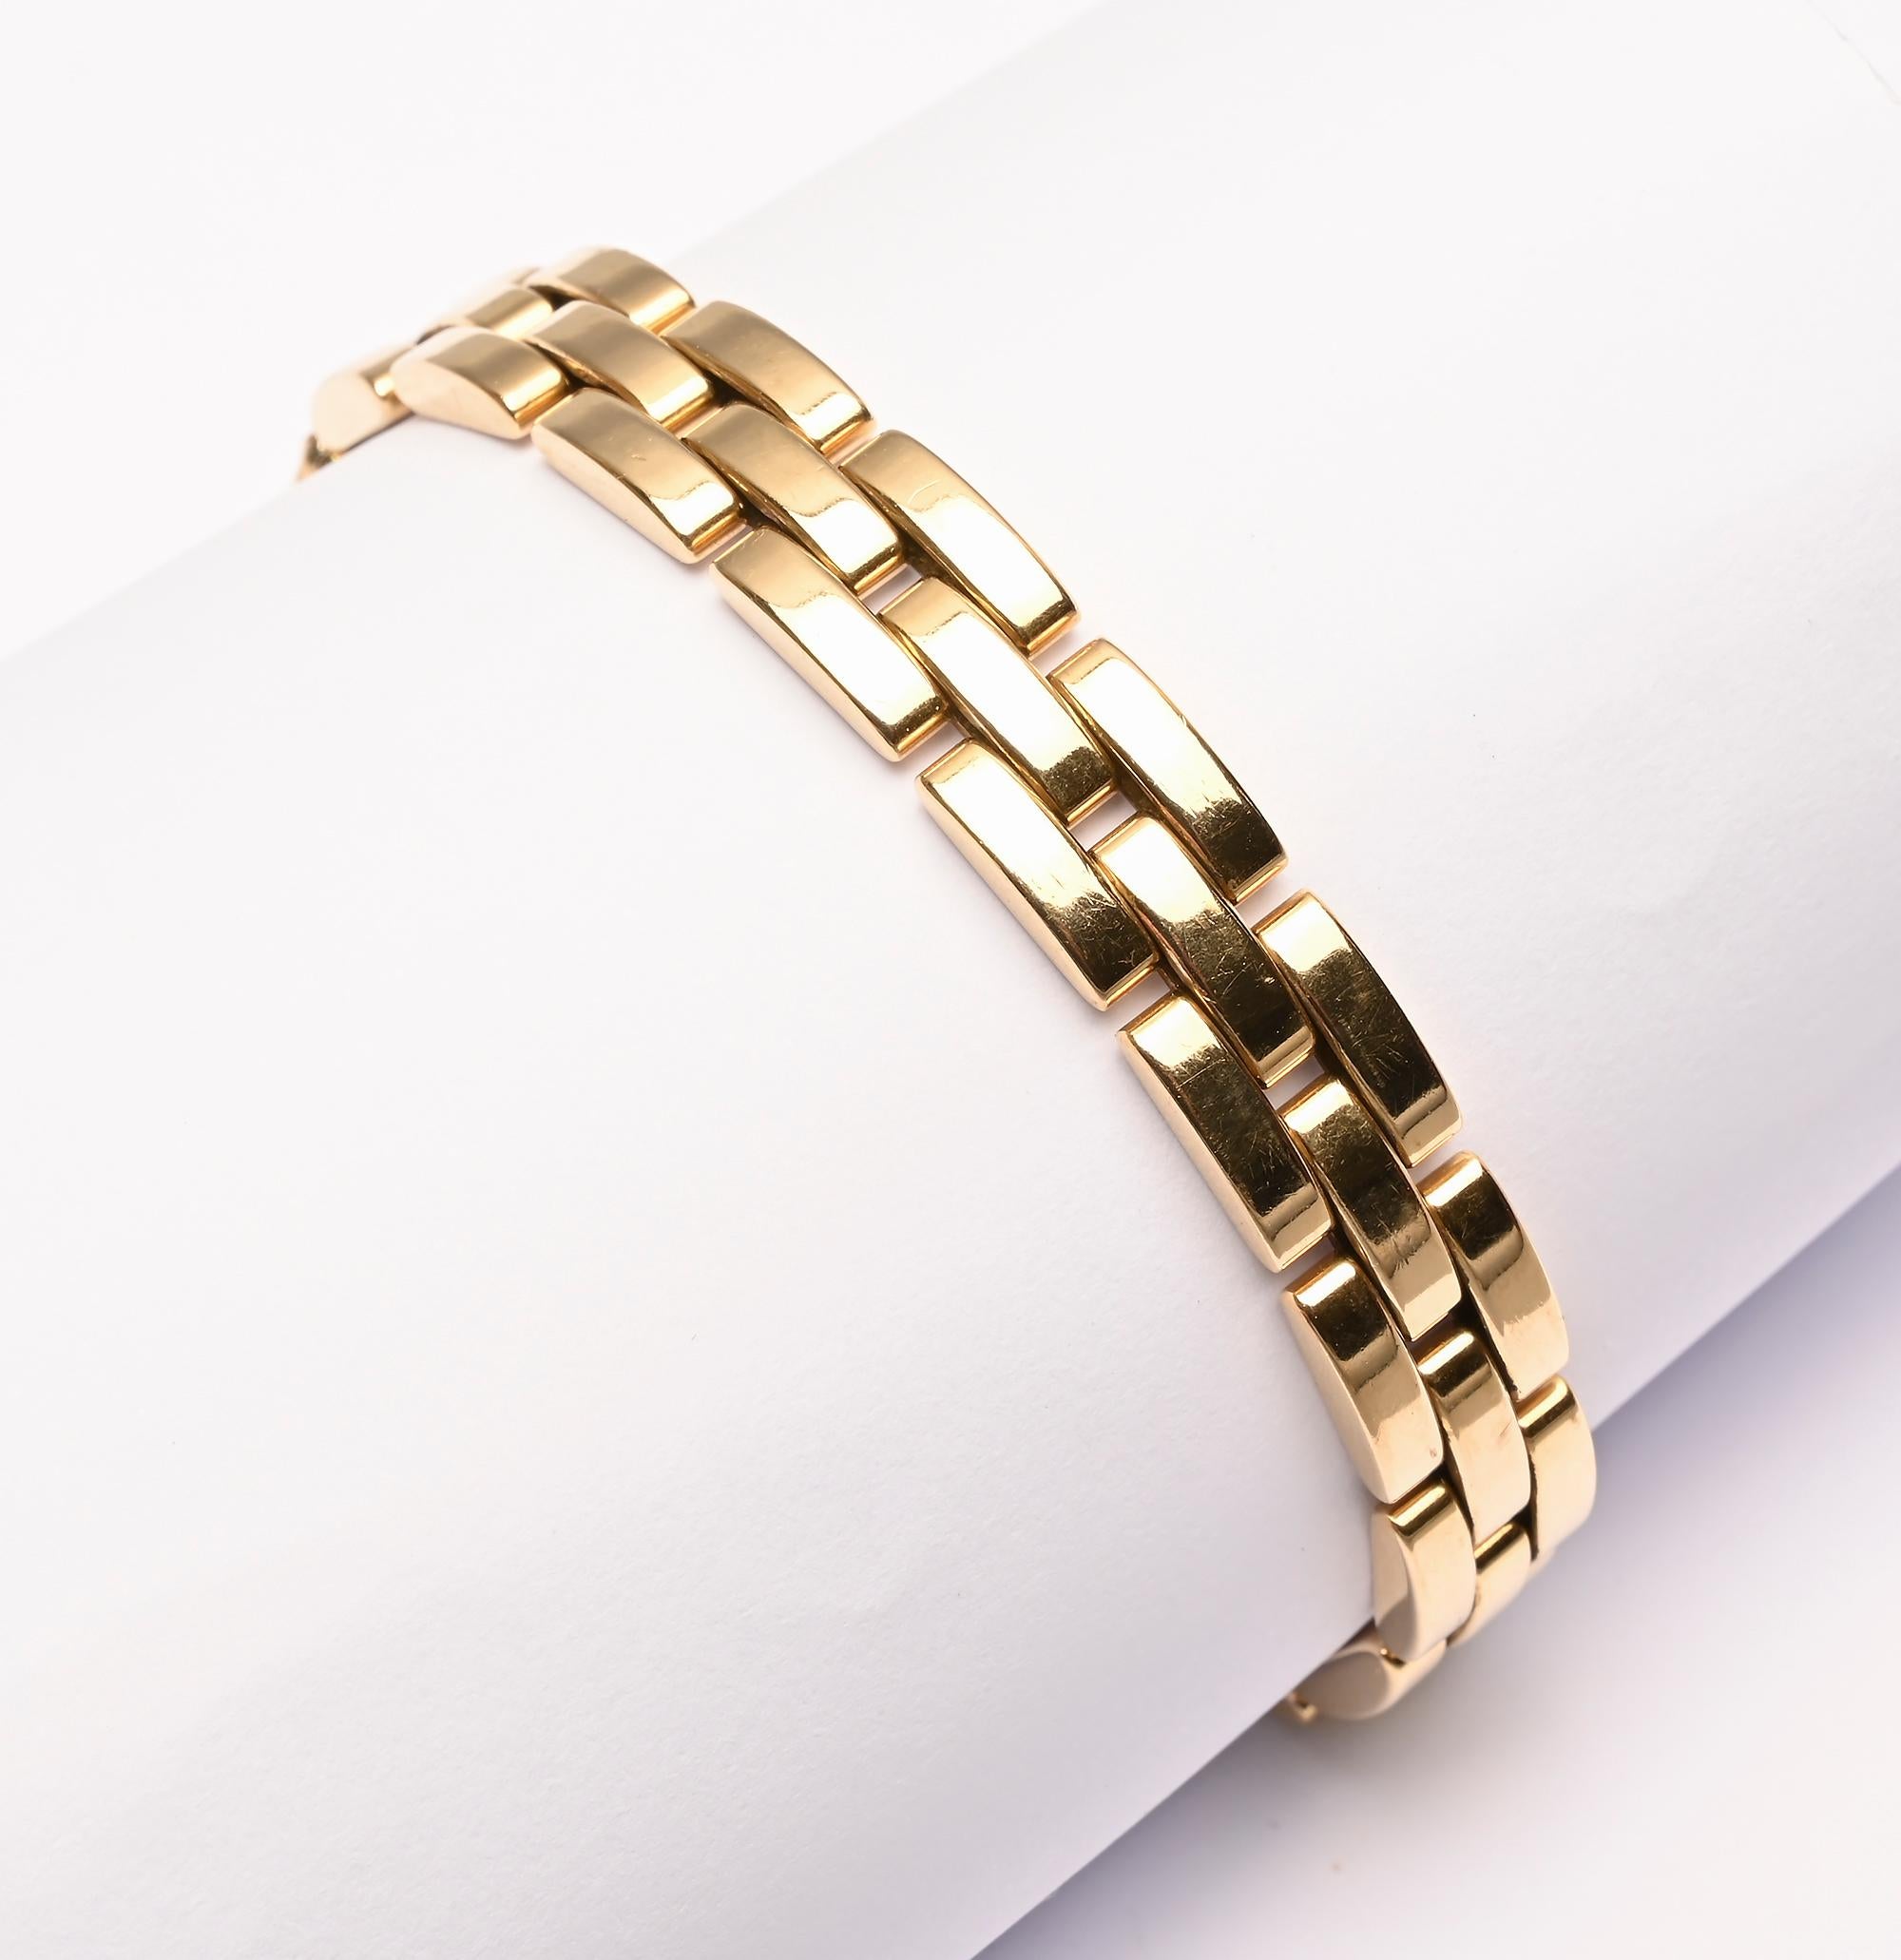 Classic Cartier links bracelet from their Maillon Panthere collection. The bracelet has three rows of rectangular links in a brickwork pattern. The bracelet measures 7 inches in length and 5/16